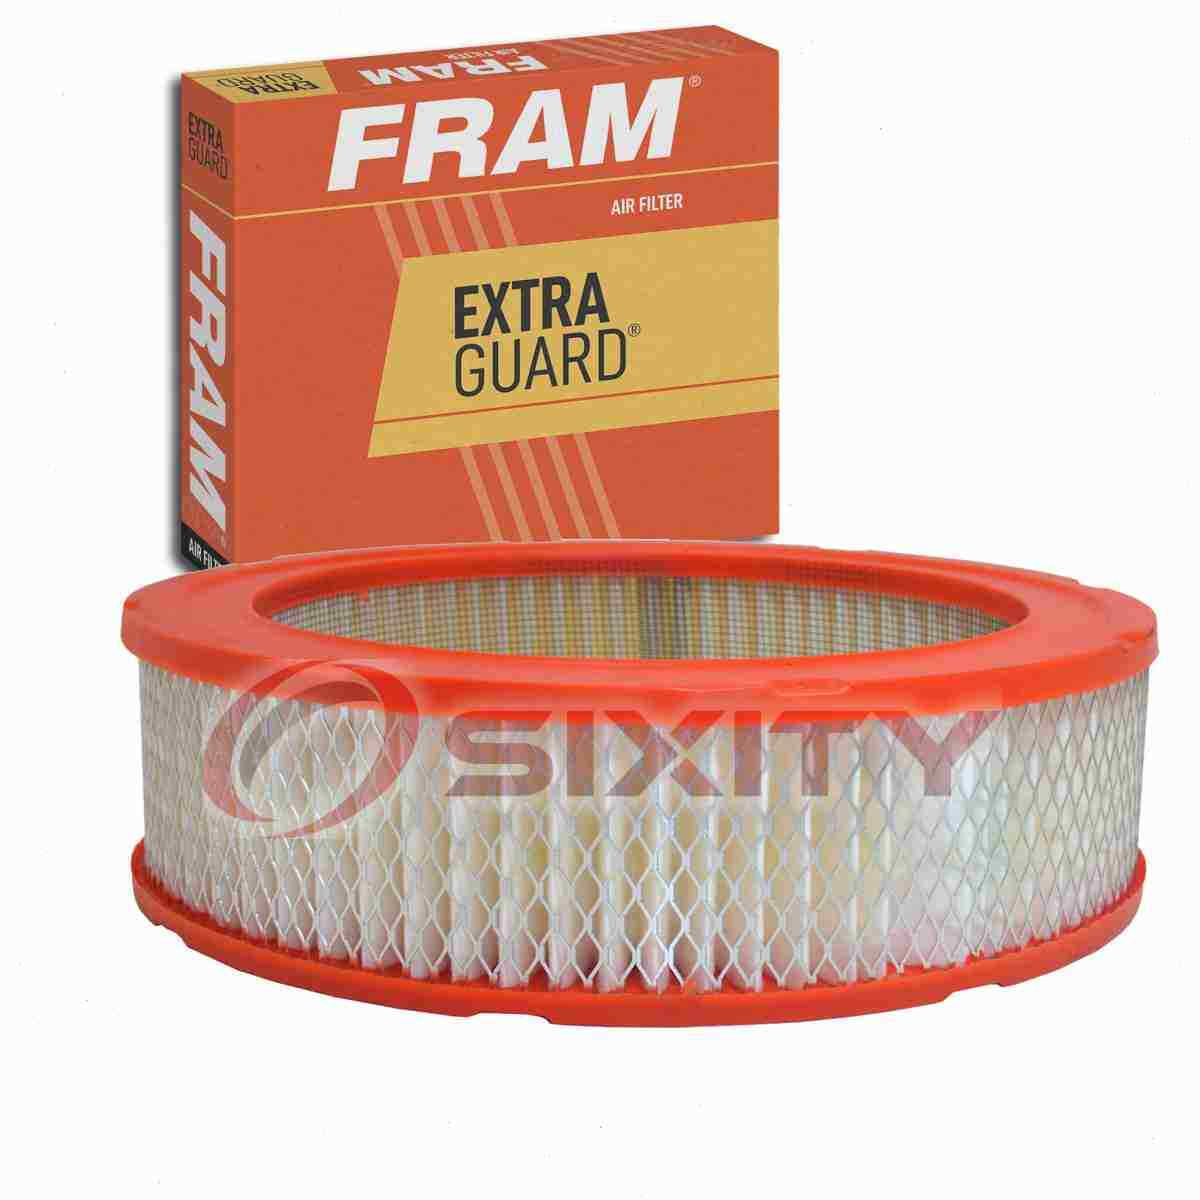 FRAM Extra Guard Air Filter for 1968 Plymouth GTX Intake Inlet Manifold Fuel uo